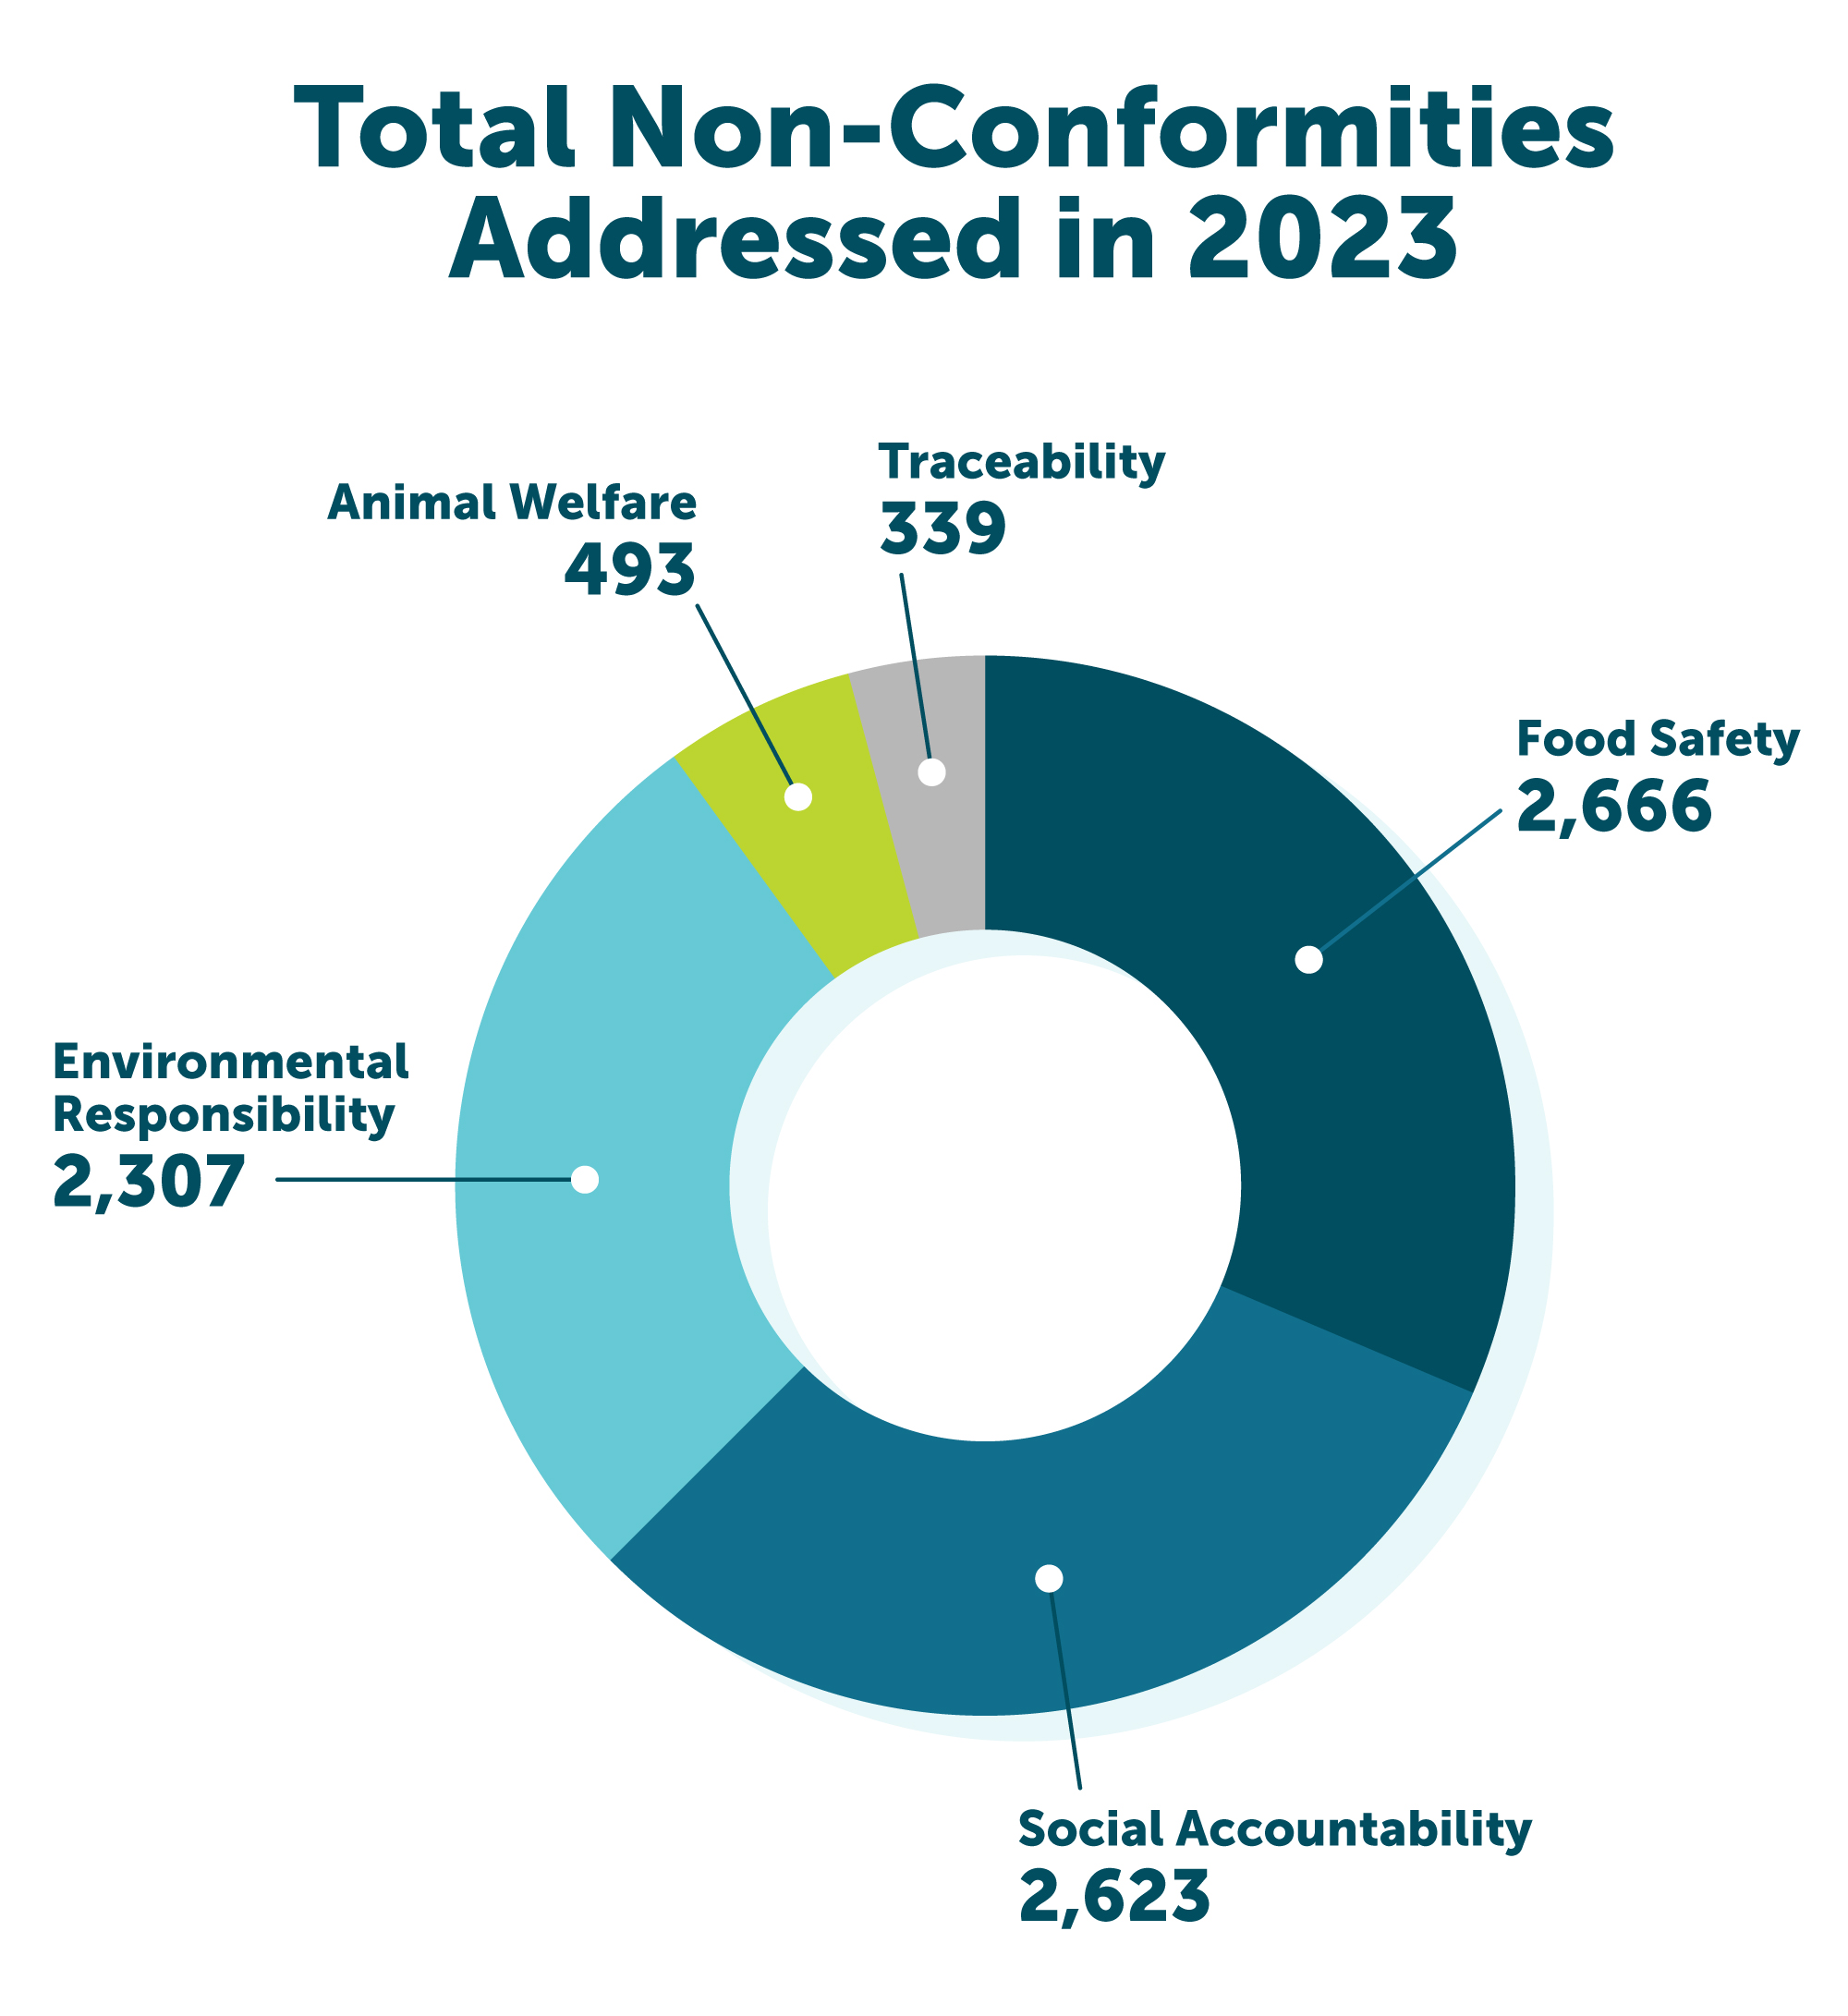 Total non-conformities addressed by producers in 2023